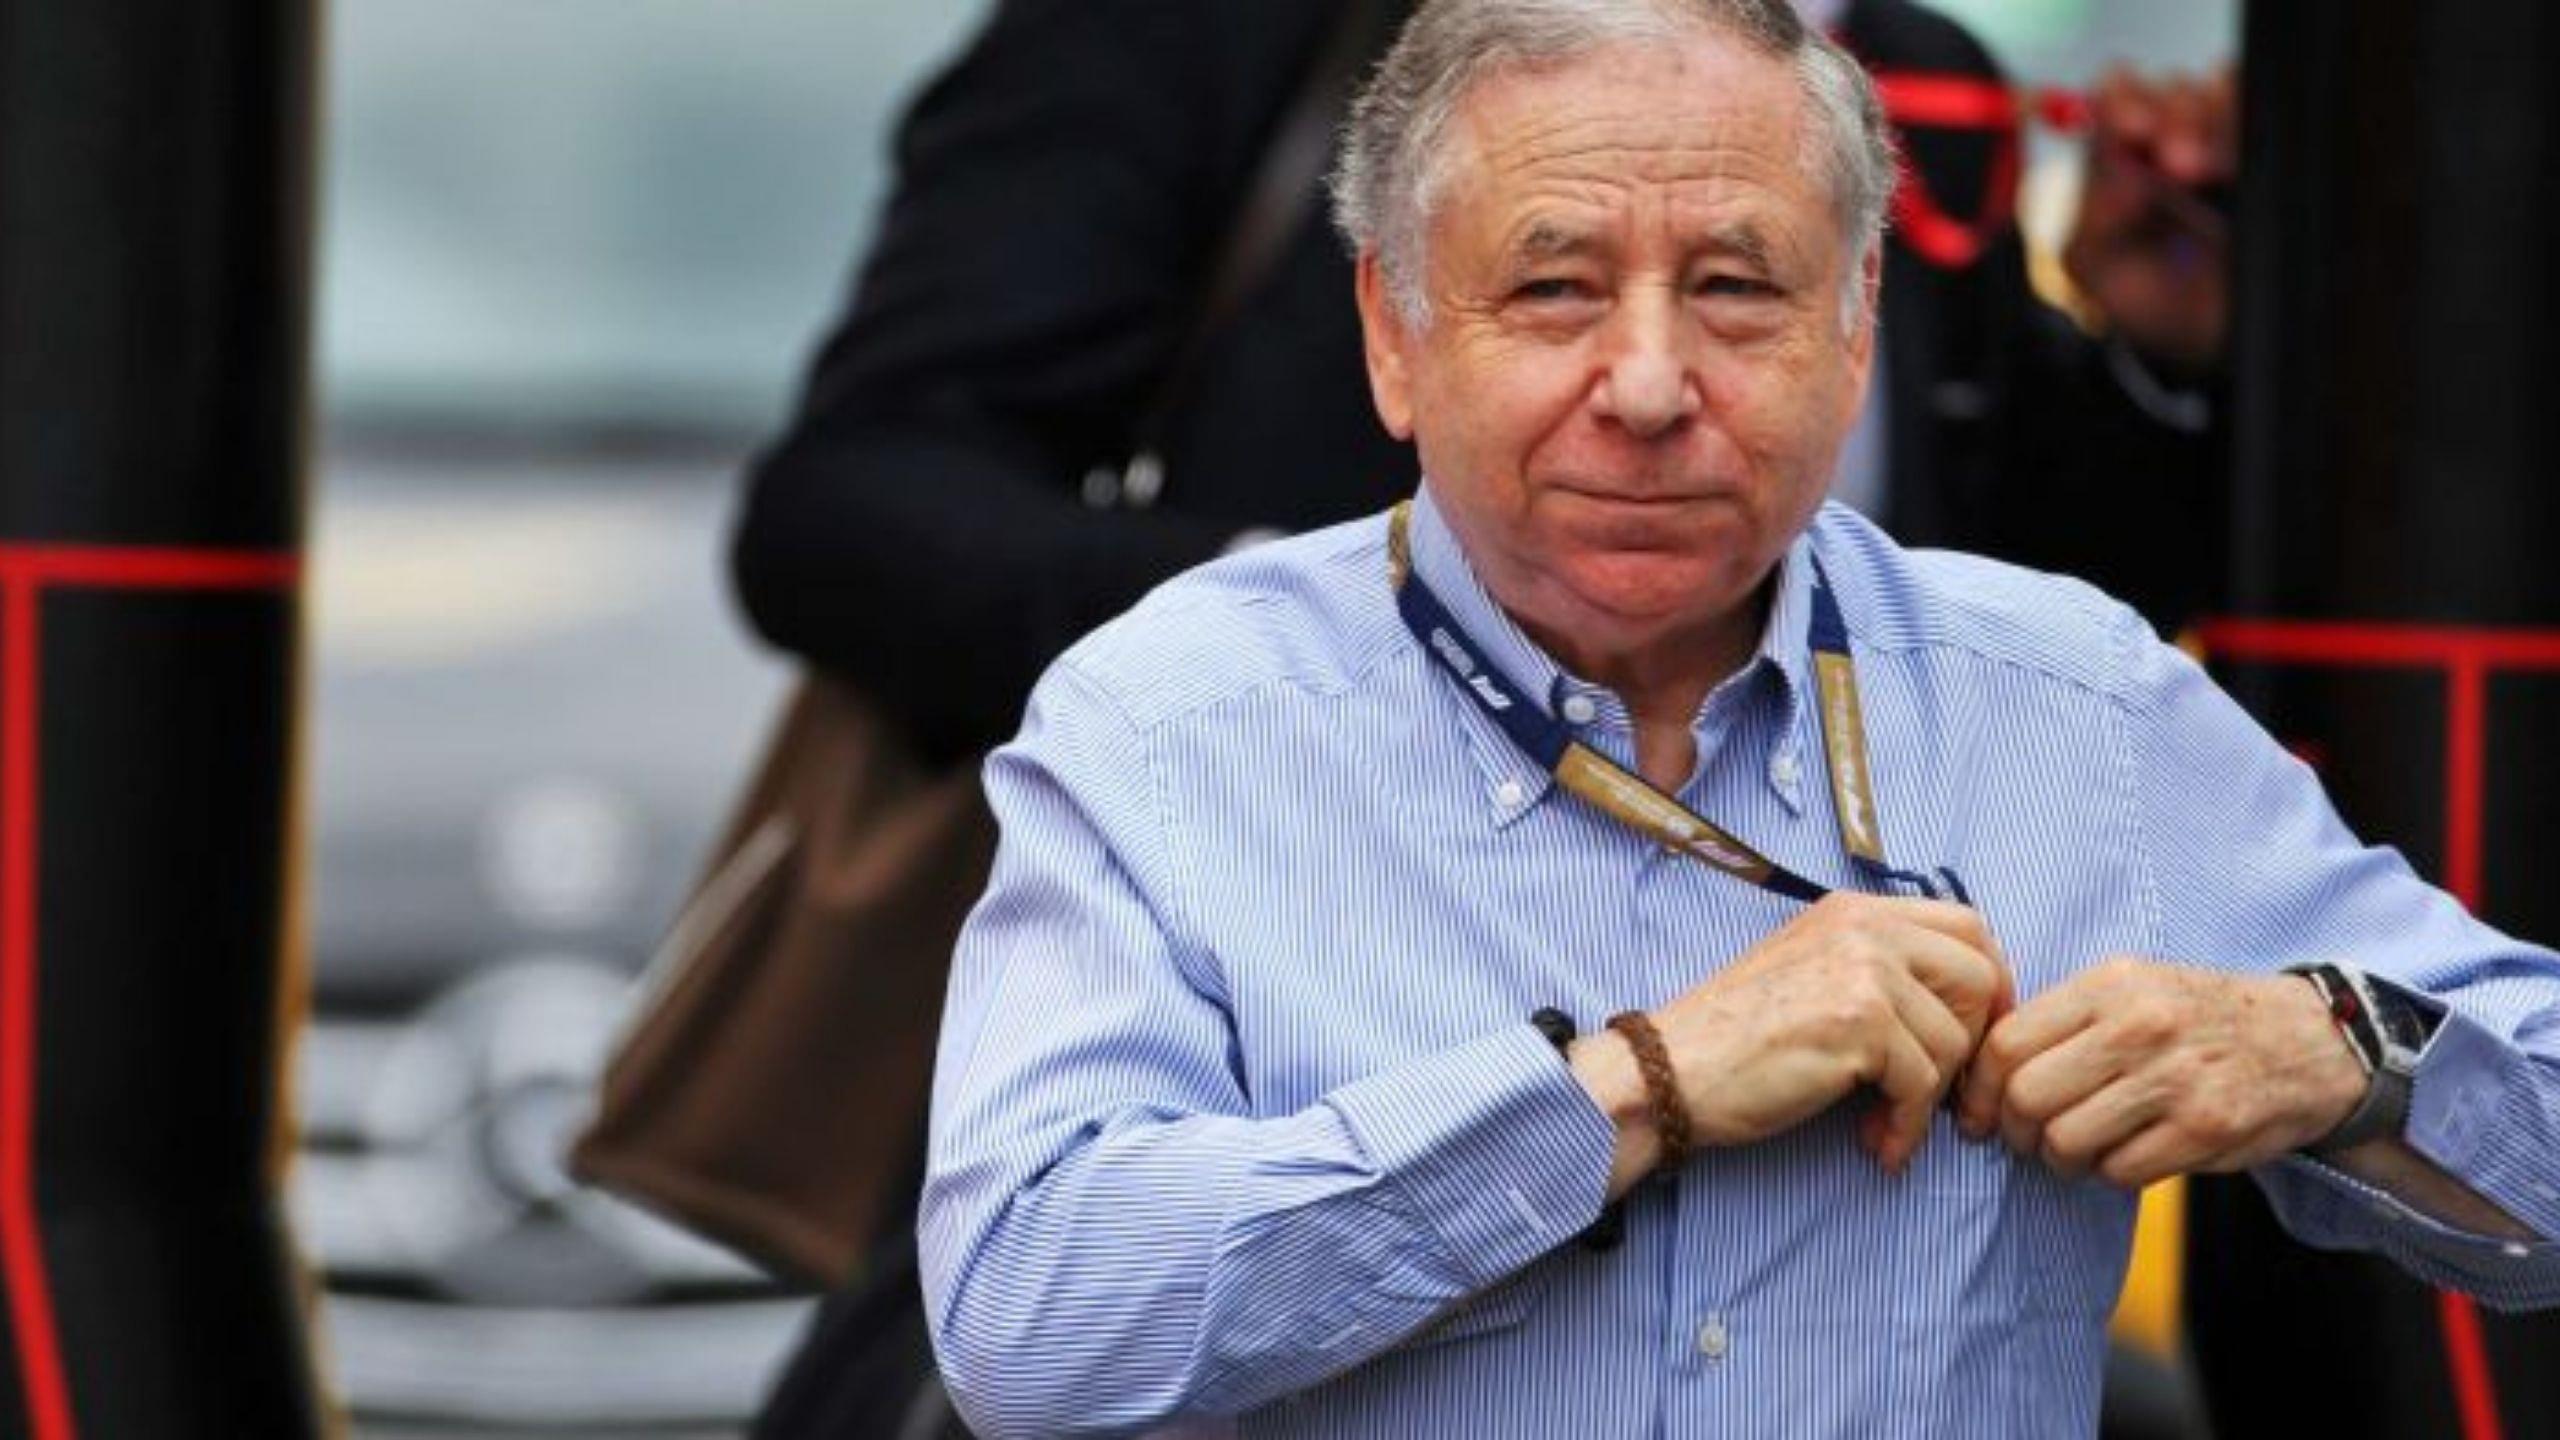 "It’s not easy to get a superlicence" - FIA boss Jean Todt defends decision allowing Nikita Mazepin to race